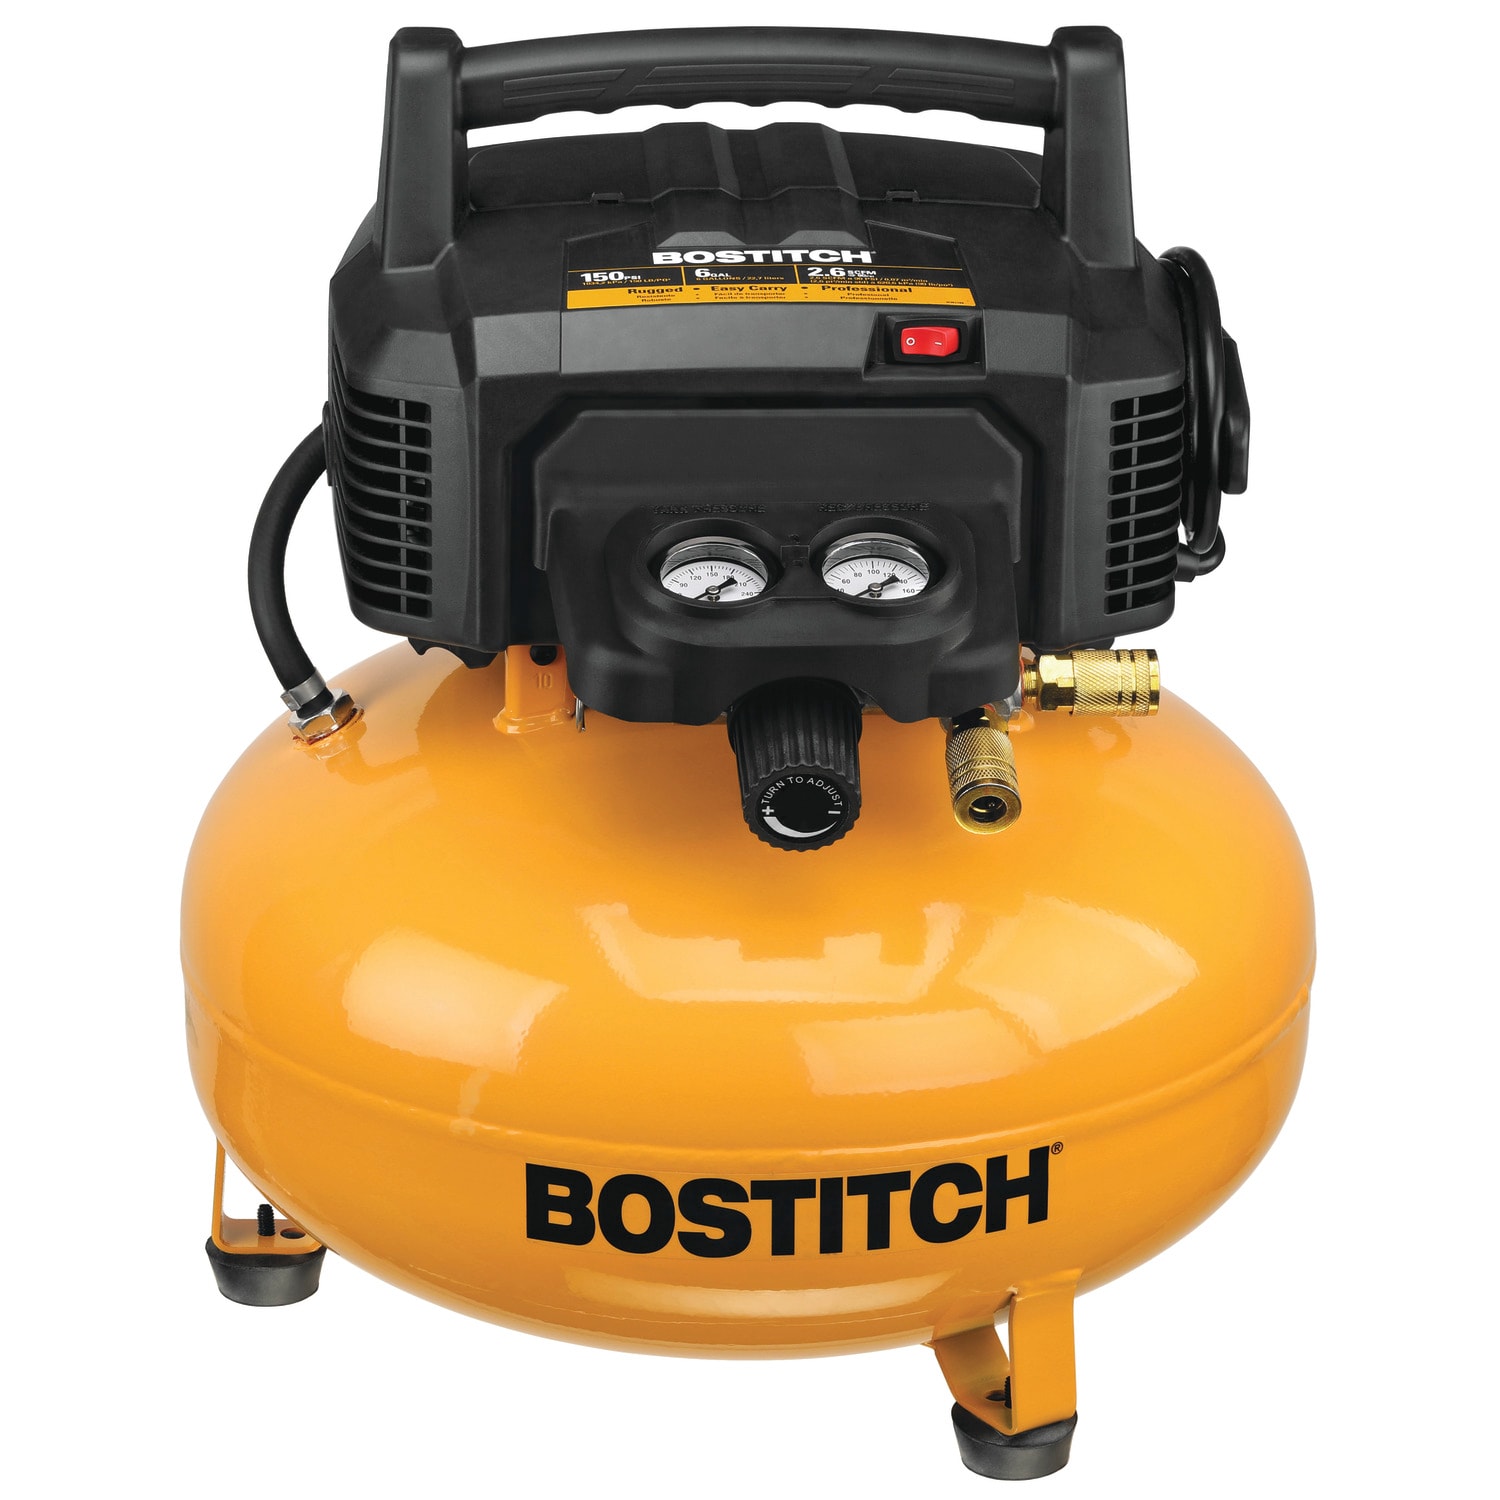 Porter-Cable 6 Gal. 150 PSI Portable Electric Pancake Air Compressor C2002  - The Home Depot